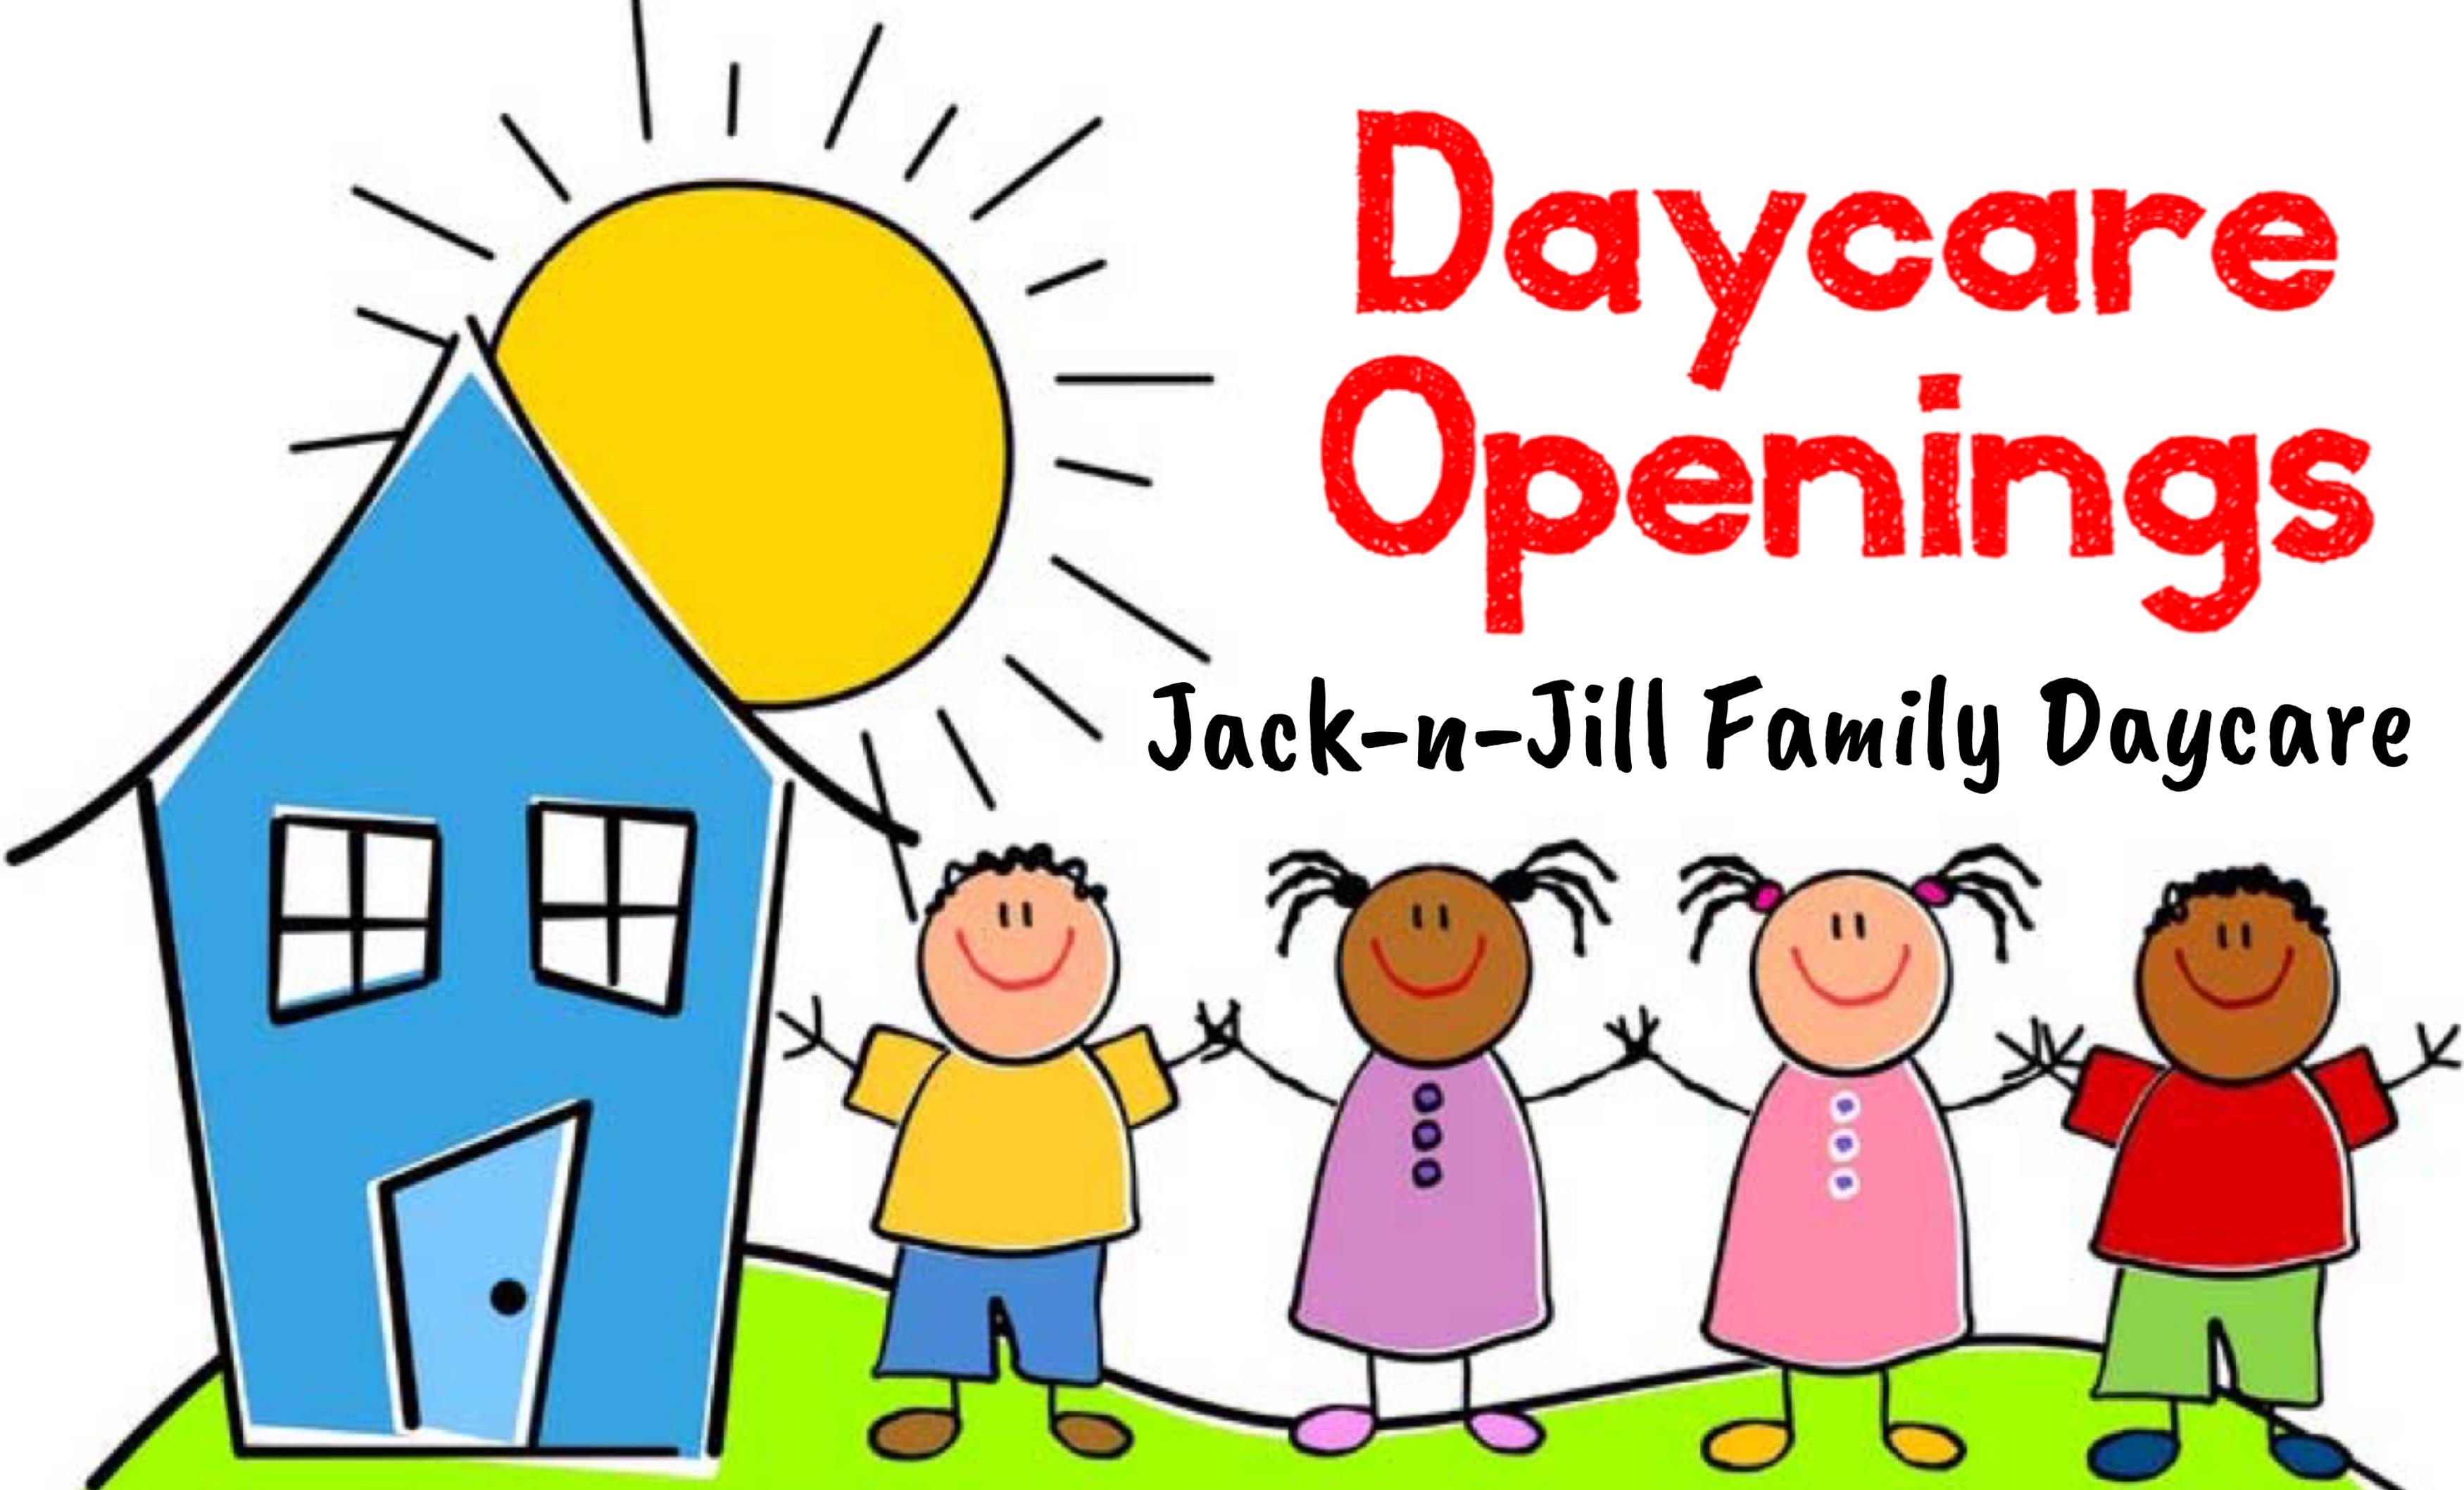 Jack-n-Jill Family Daycare in Sioux Falls, SD